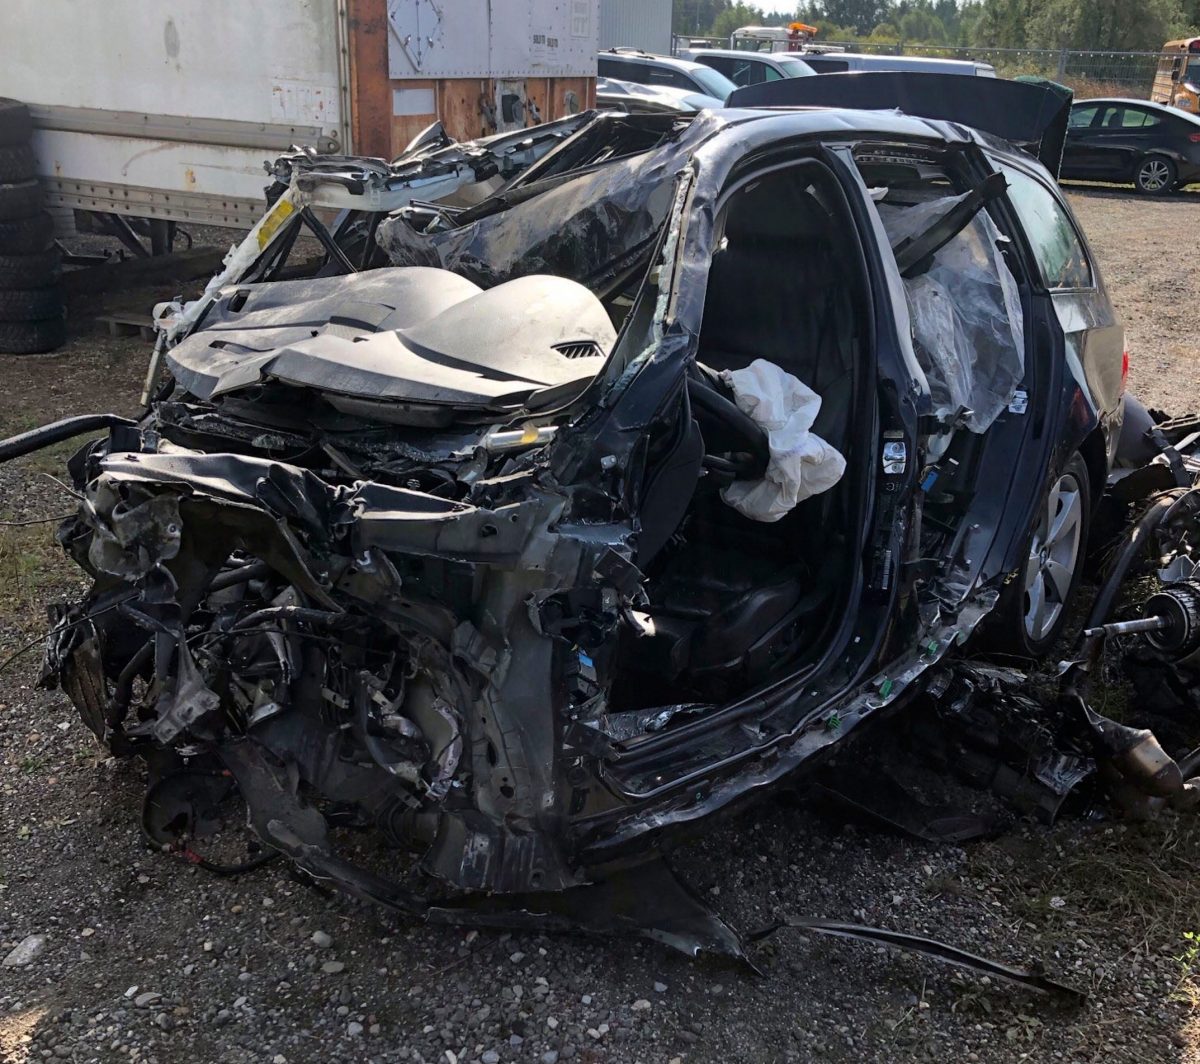 This Tuesday, Oct. 1, 2019 photo, released by the Ontario Provincial Police, shows the a smashed up vehicle involved in a fatal crash with transport truck near Shelburne, Ontario. Canadian police say the Jamaican dancehall reggae artist and actor known as Louie Rankin died Monday, Sept. 30, 2019, in the car crash involving a transport truck.